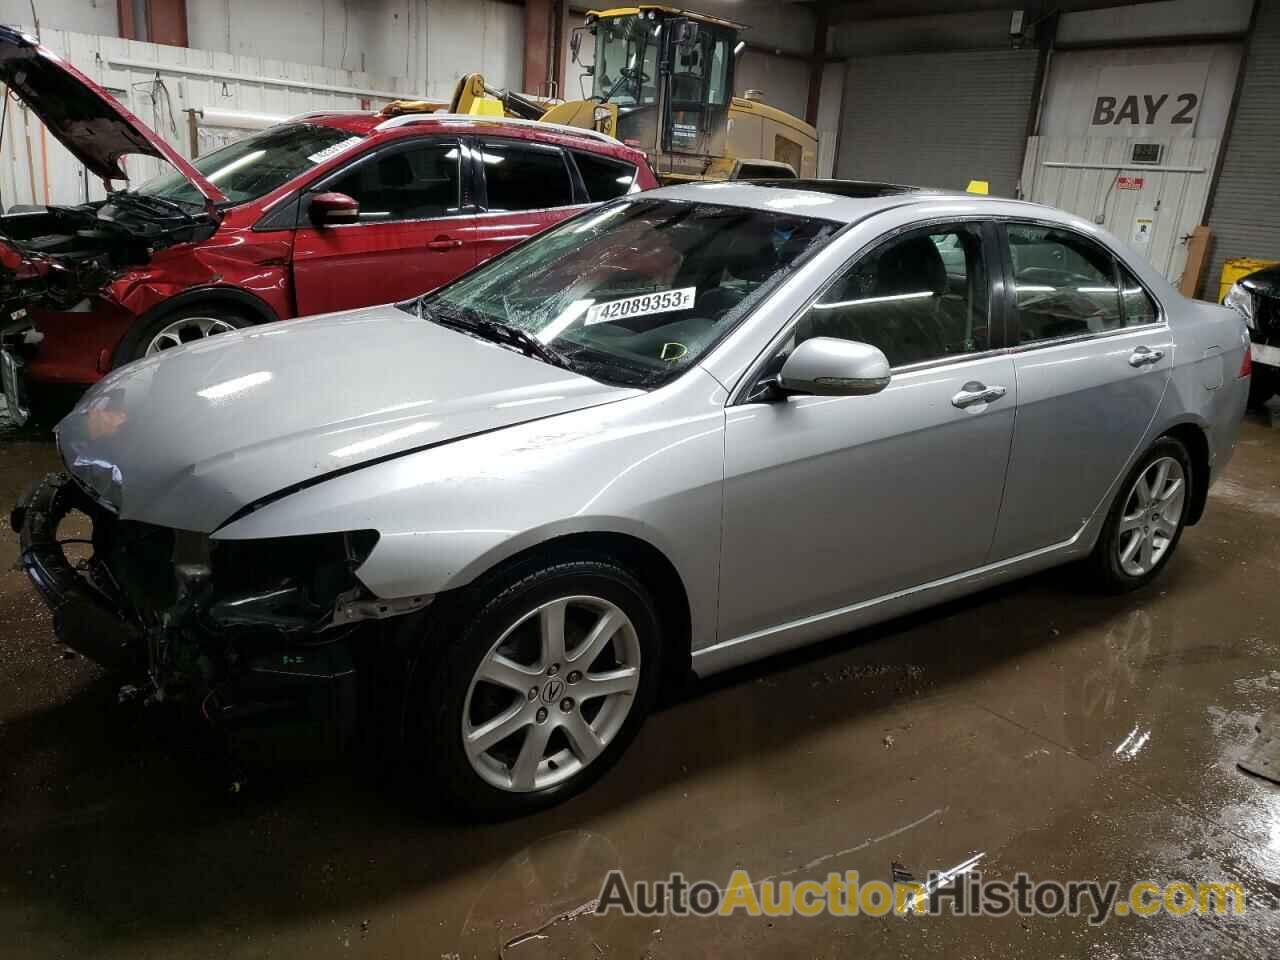 2005 ACURA TSX, JH4CL96855C000957